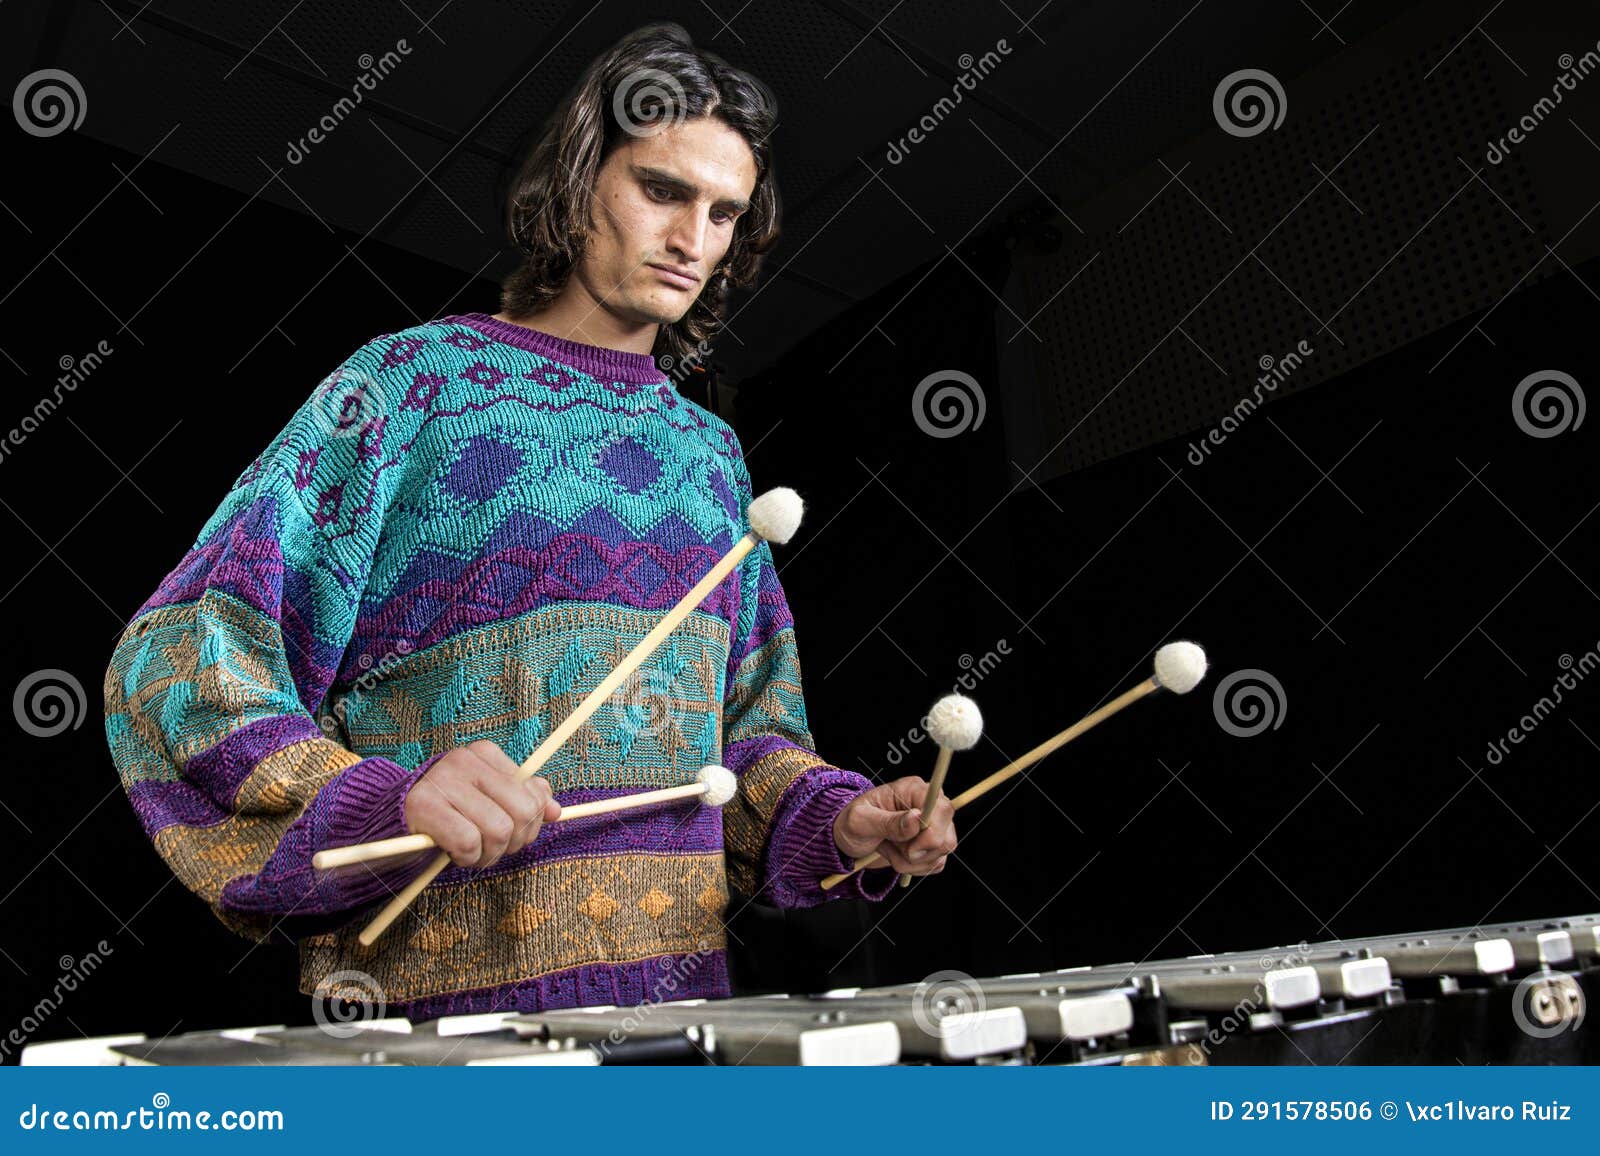 young jazz musician playing the vibraphone in his private rehearsal room. black background.